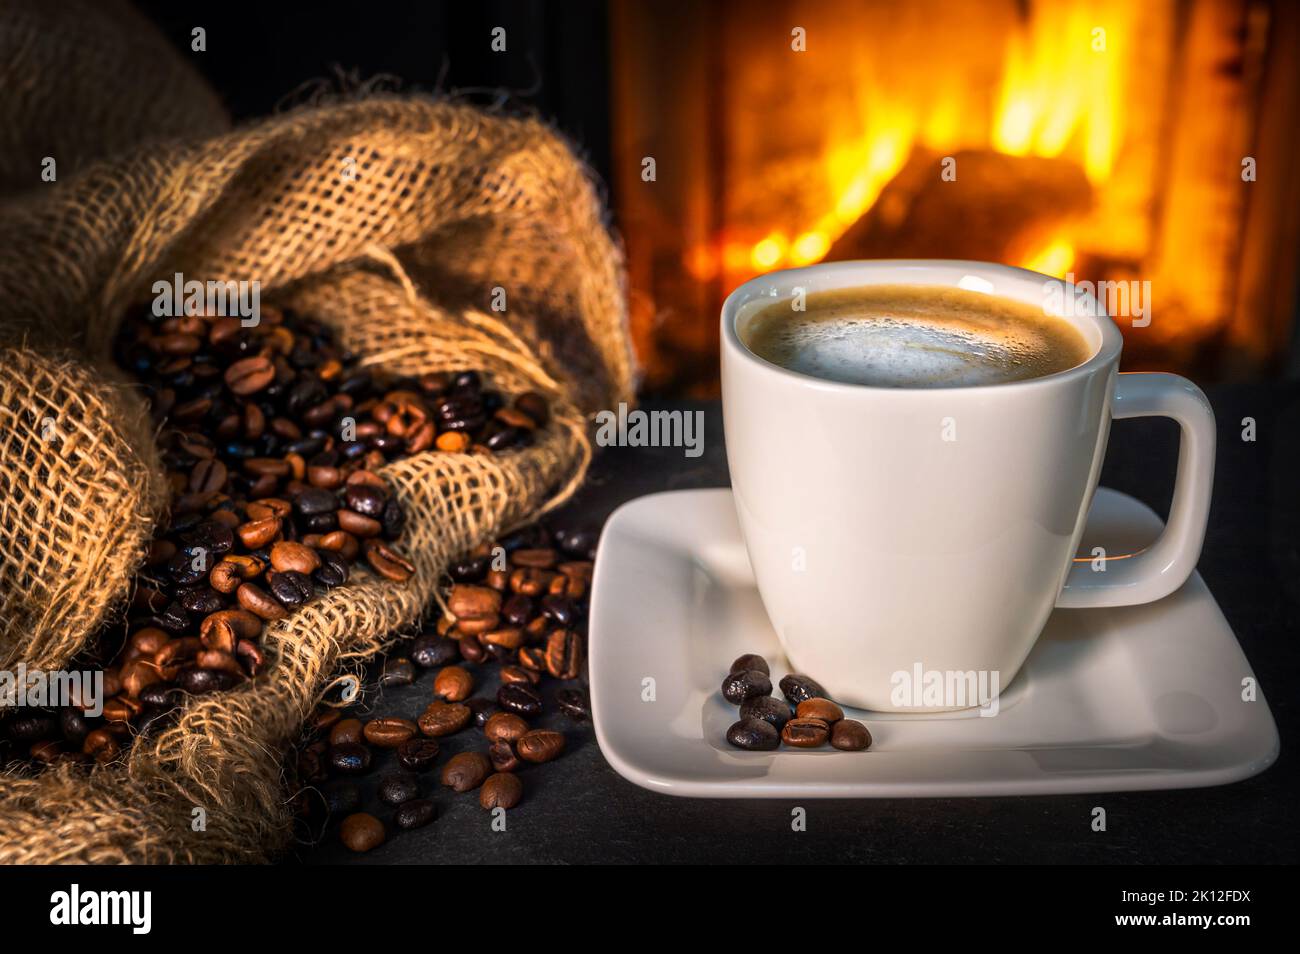 Delicious coffee in front of a fireplace Stock Photo